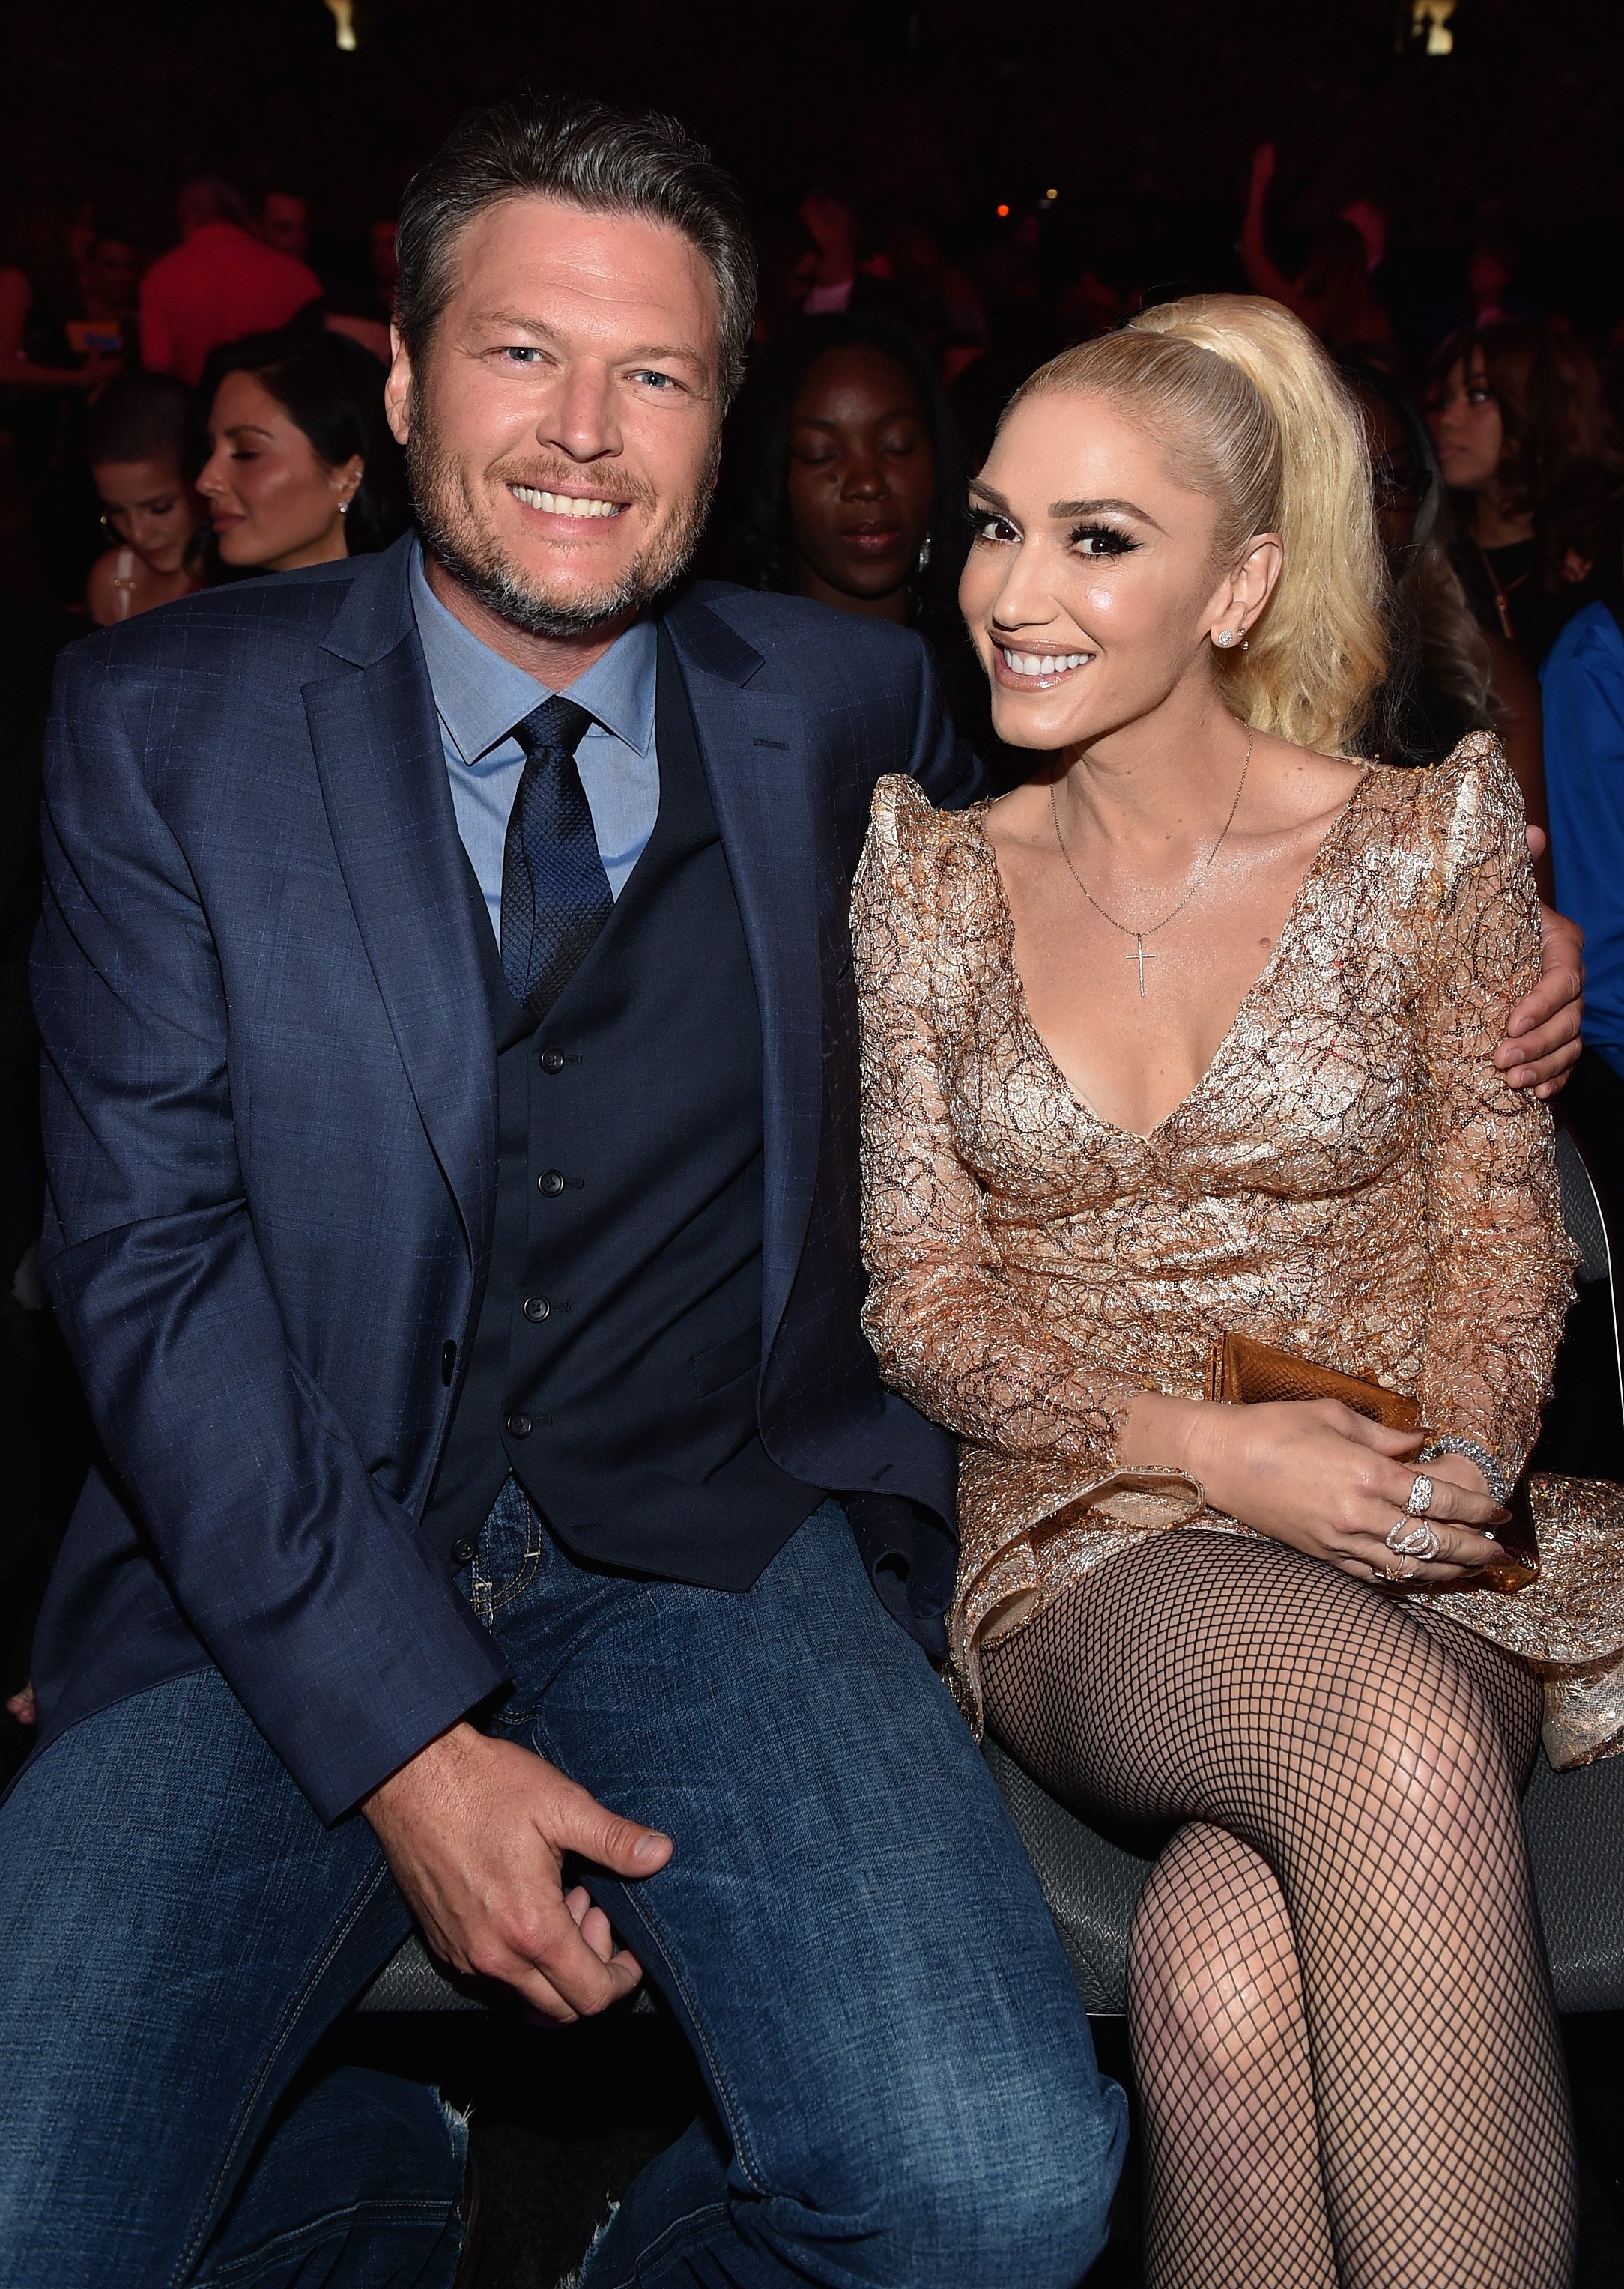 Blake Shelton and Gwen Stefani attend the 2017 Billboard Music Awards on May 21, 2017 in Las Vegas, Nevada. | Source: Getty Images.